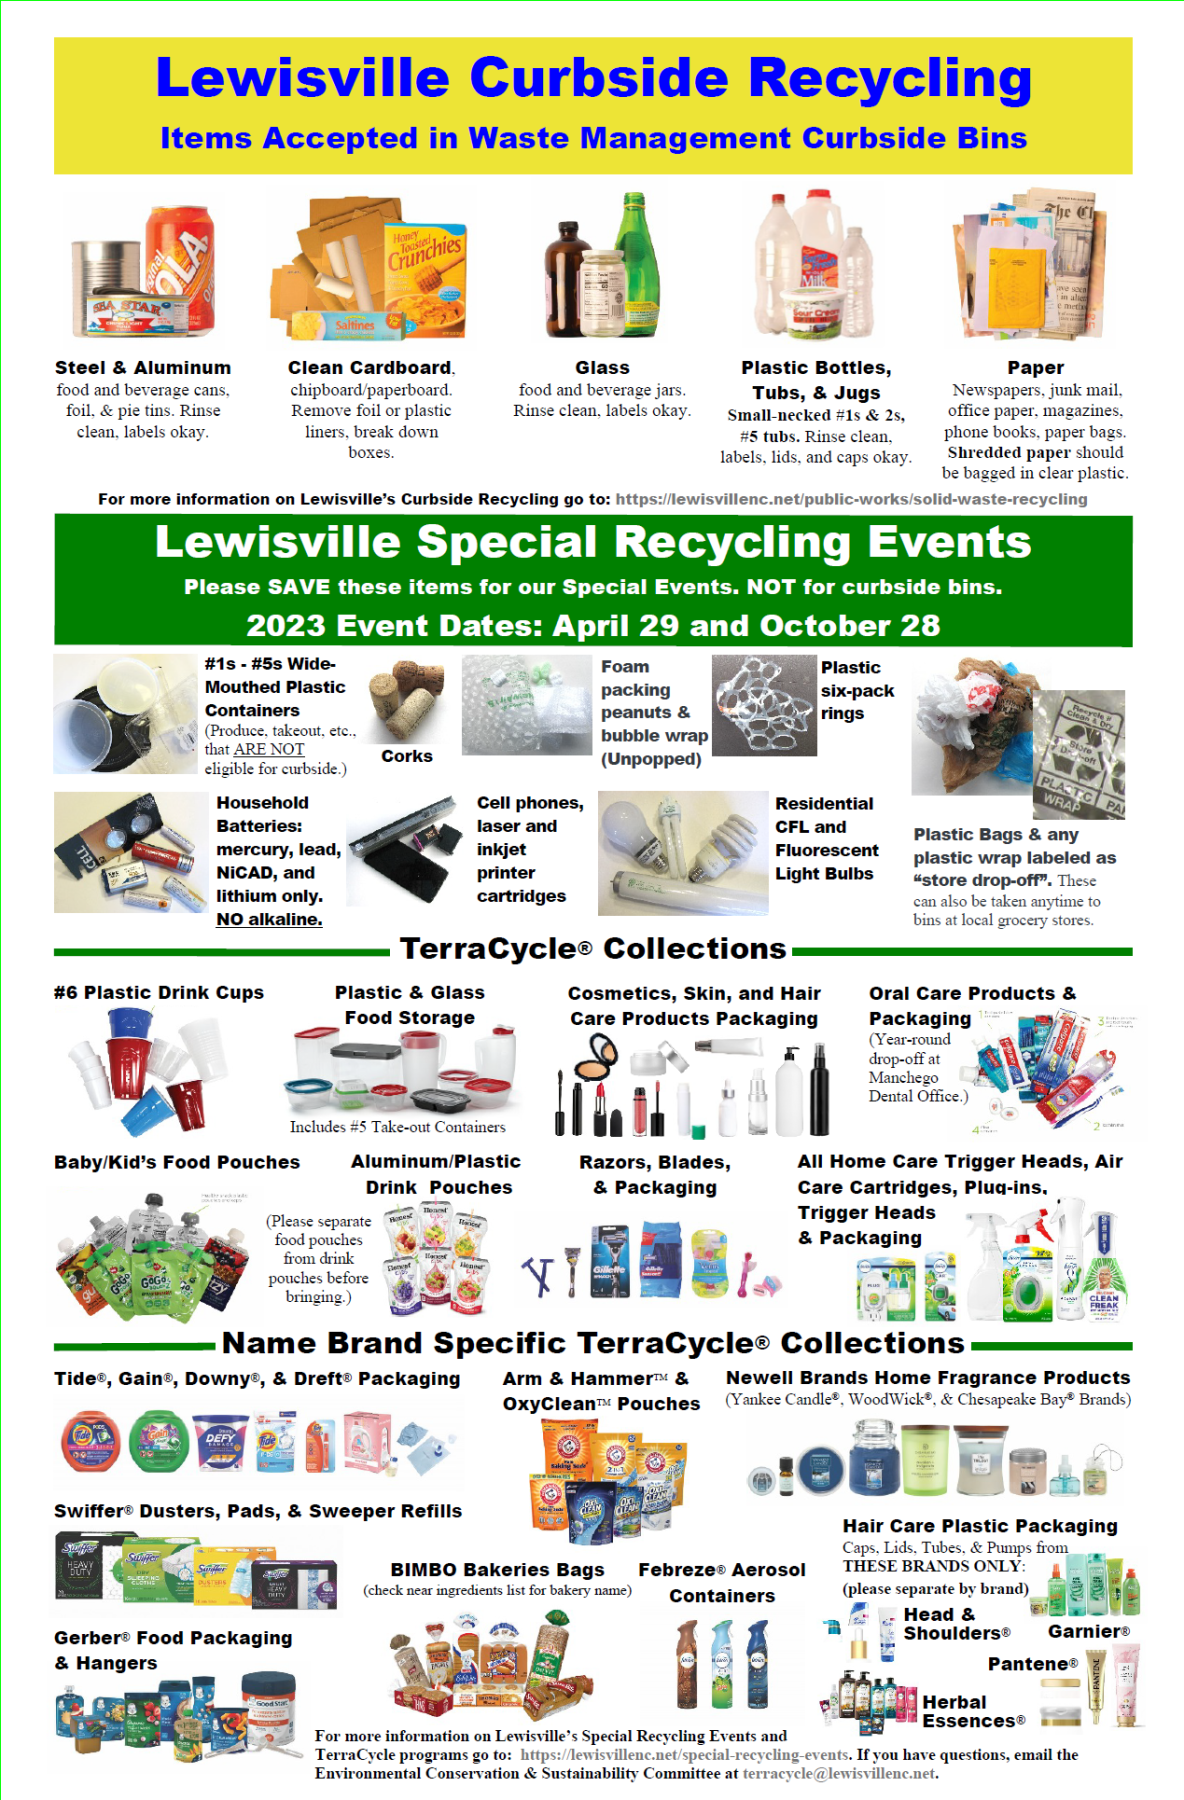 List of recyclable items